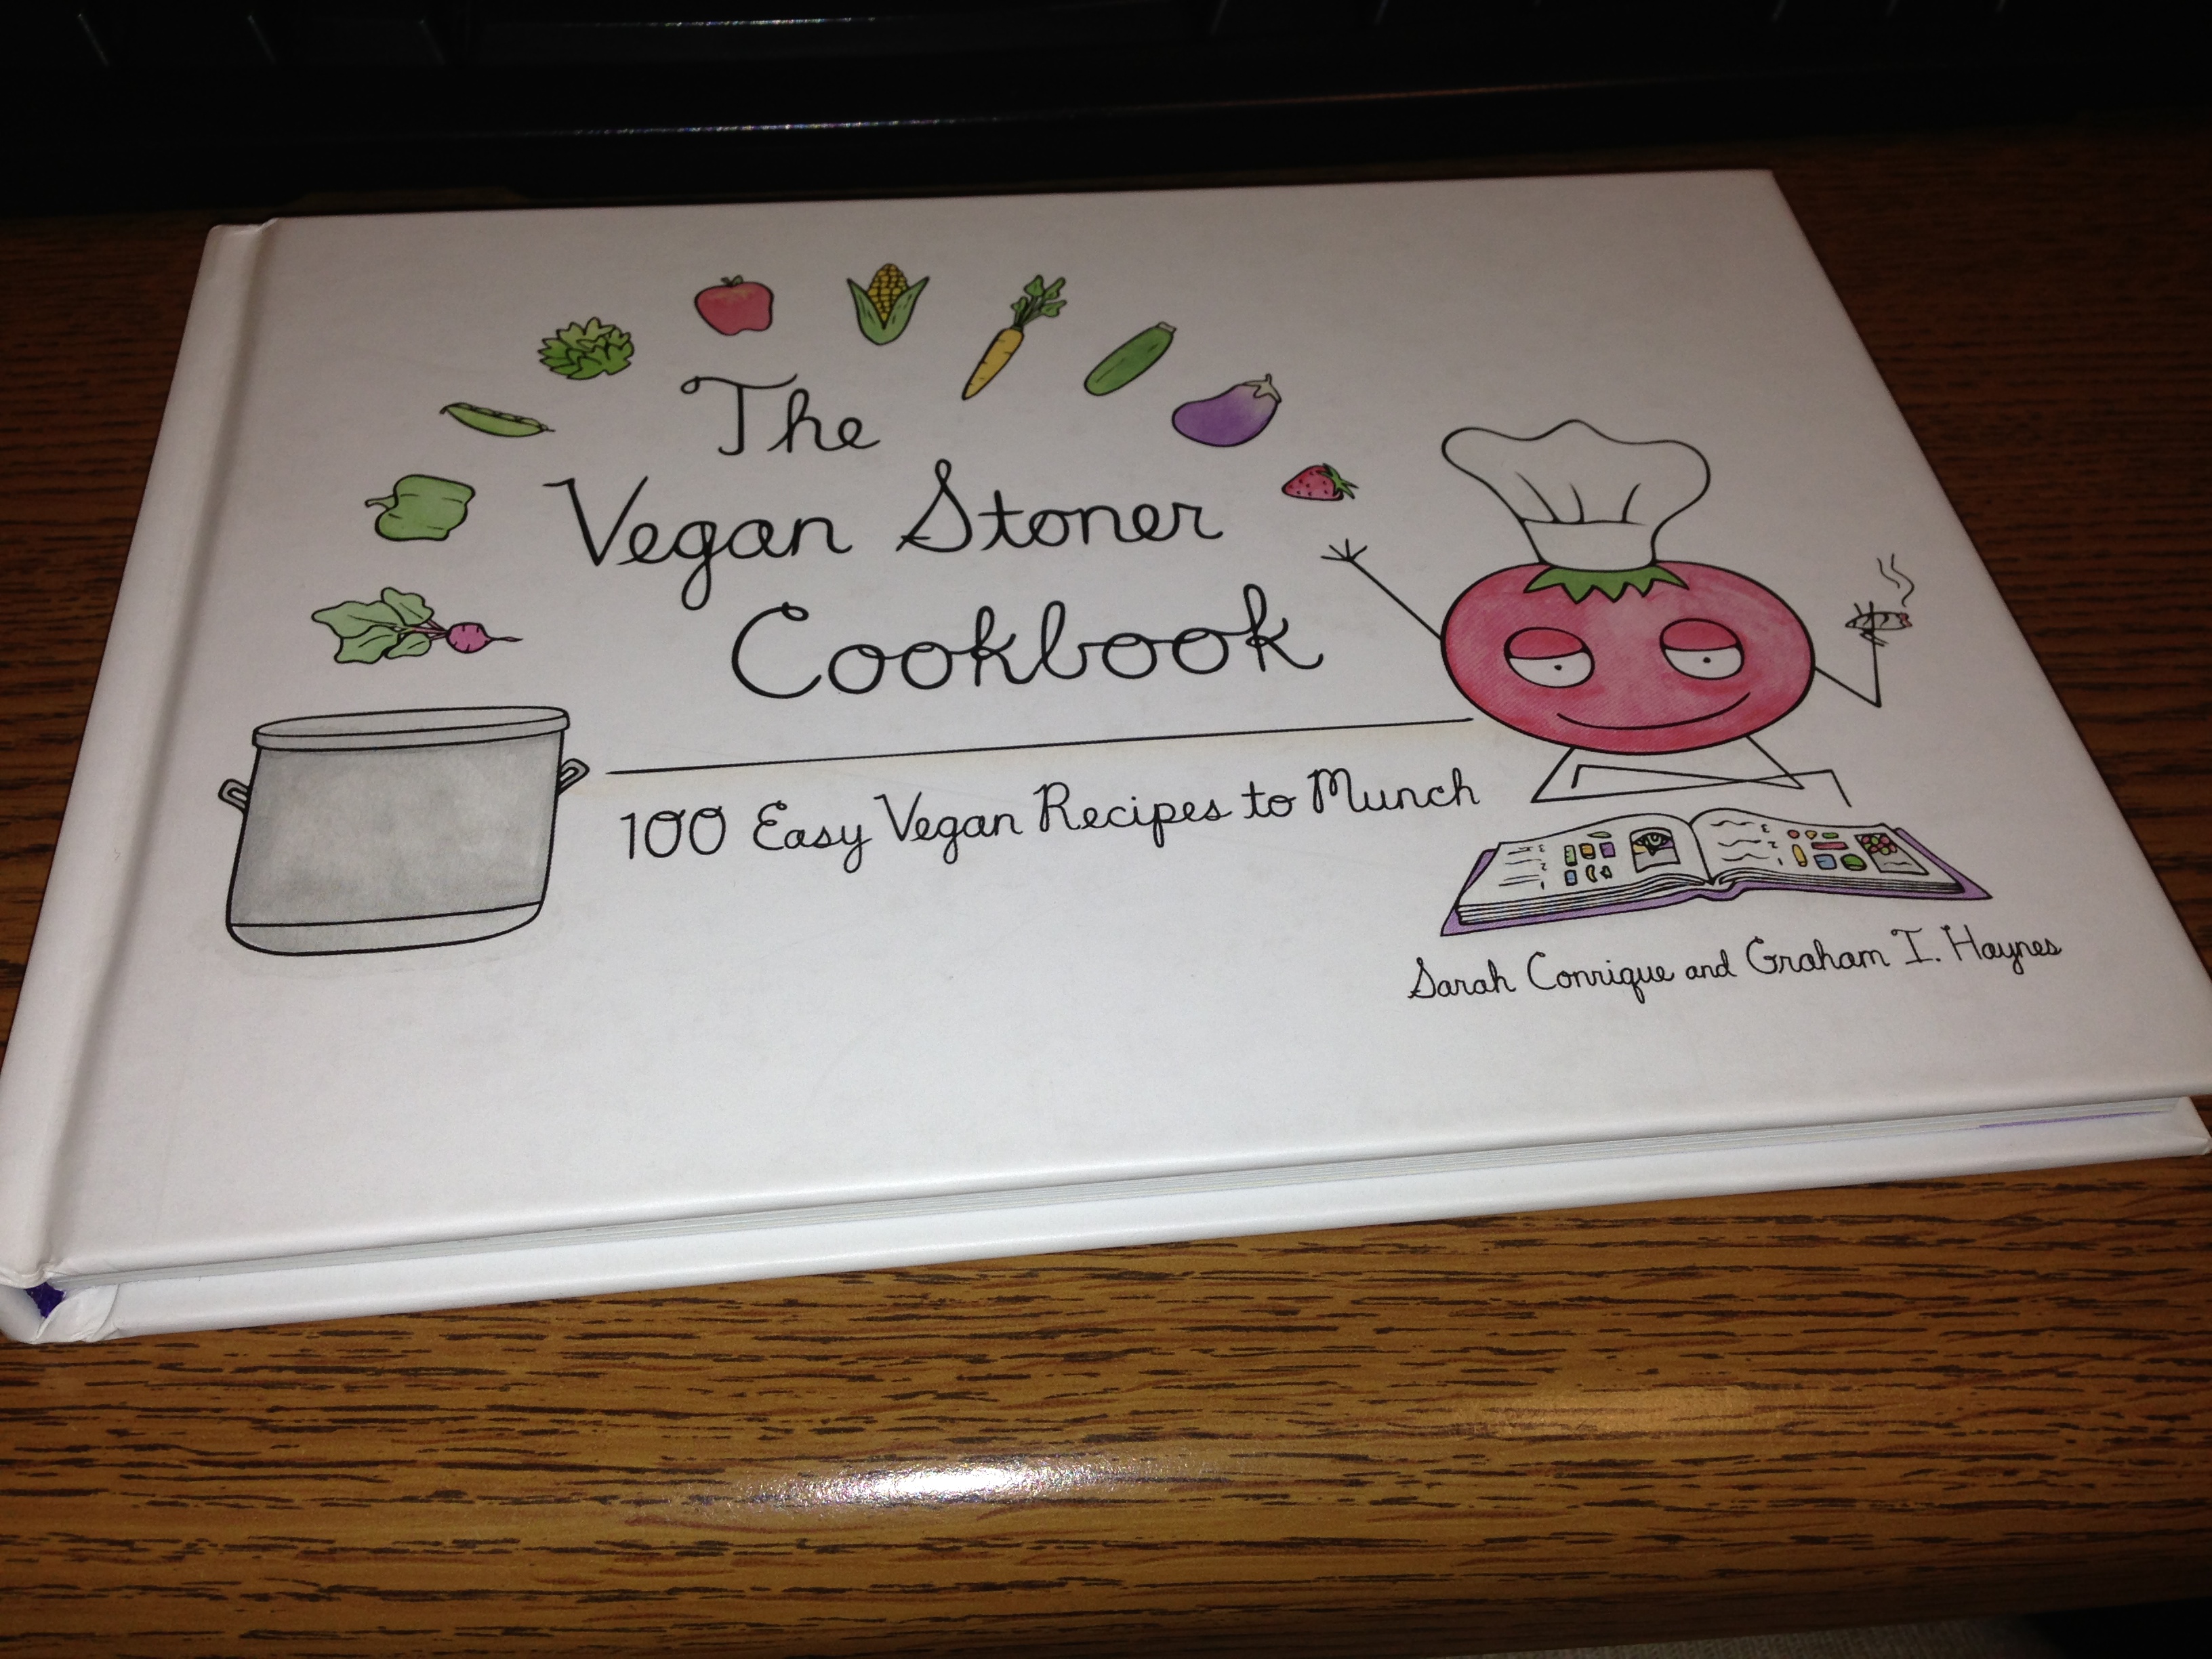 While the title The Vegan Stoner Cookbook may lead you to think